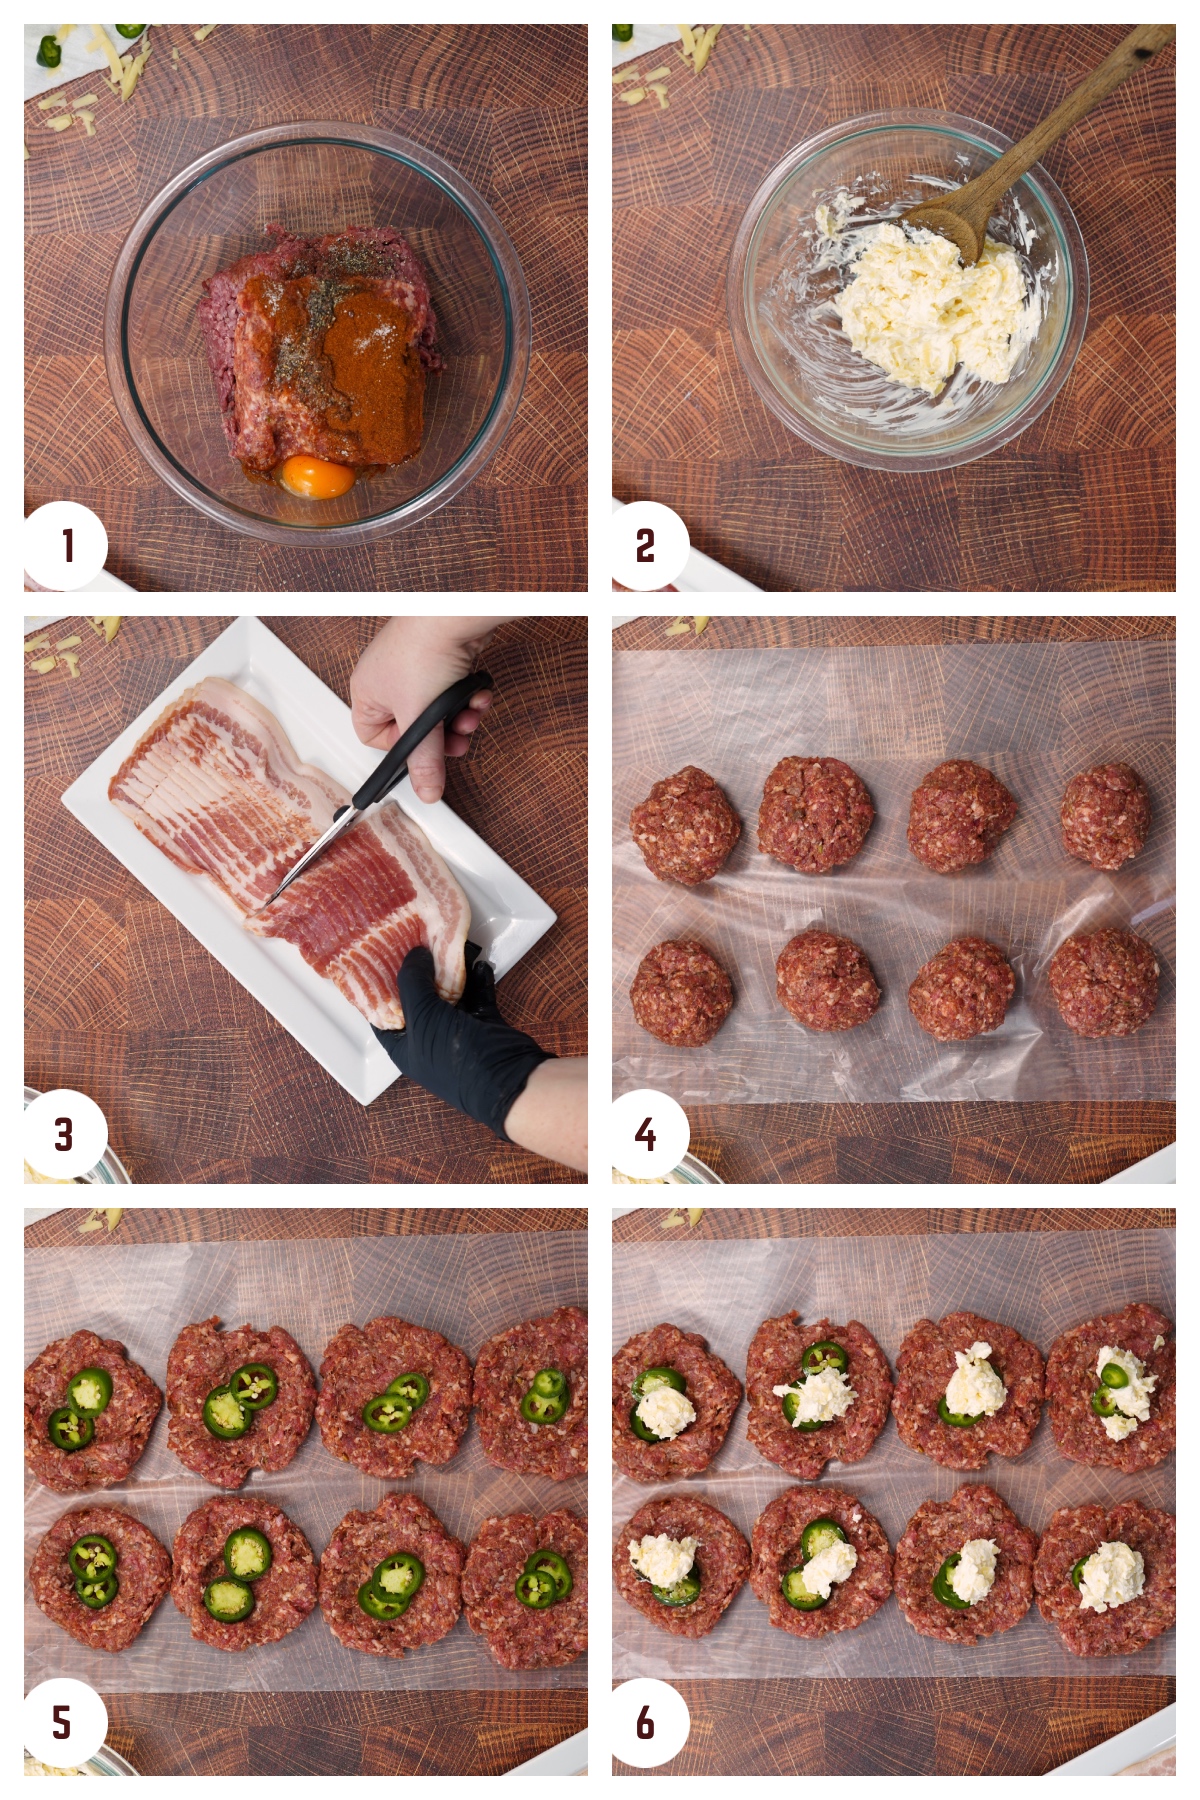 How to make bacon wrapped stuffed meatballs